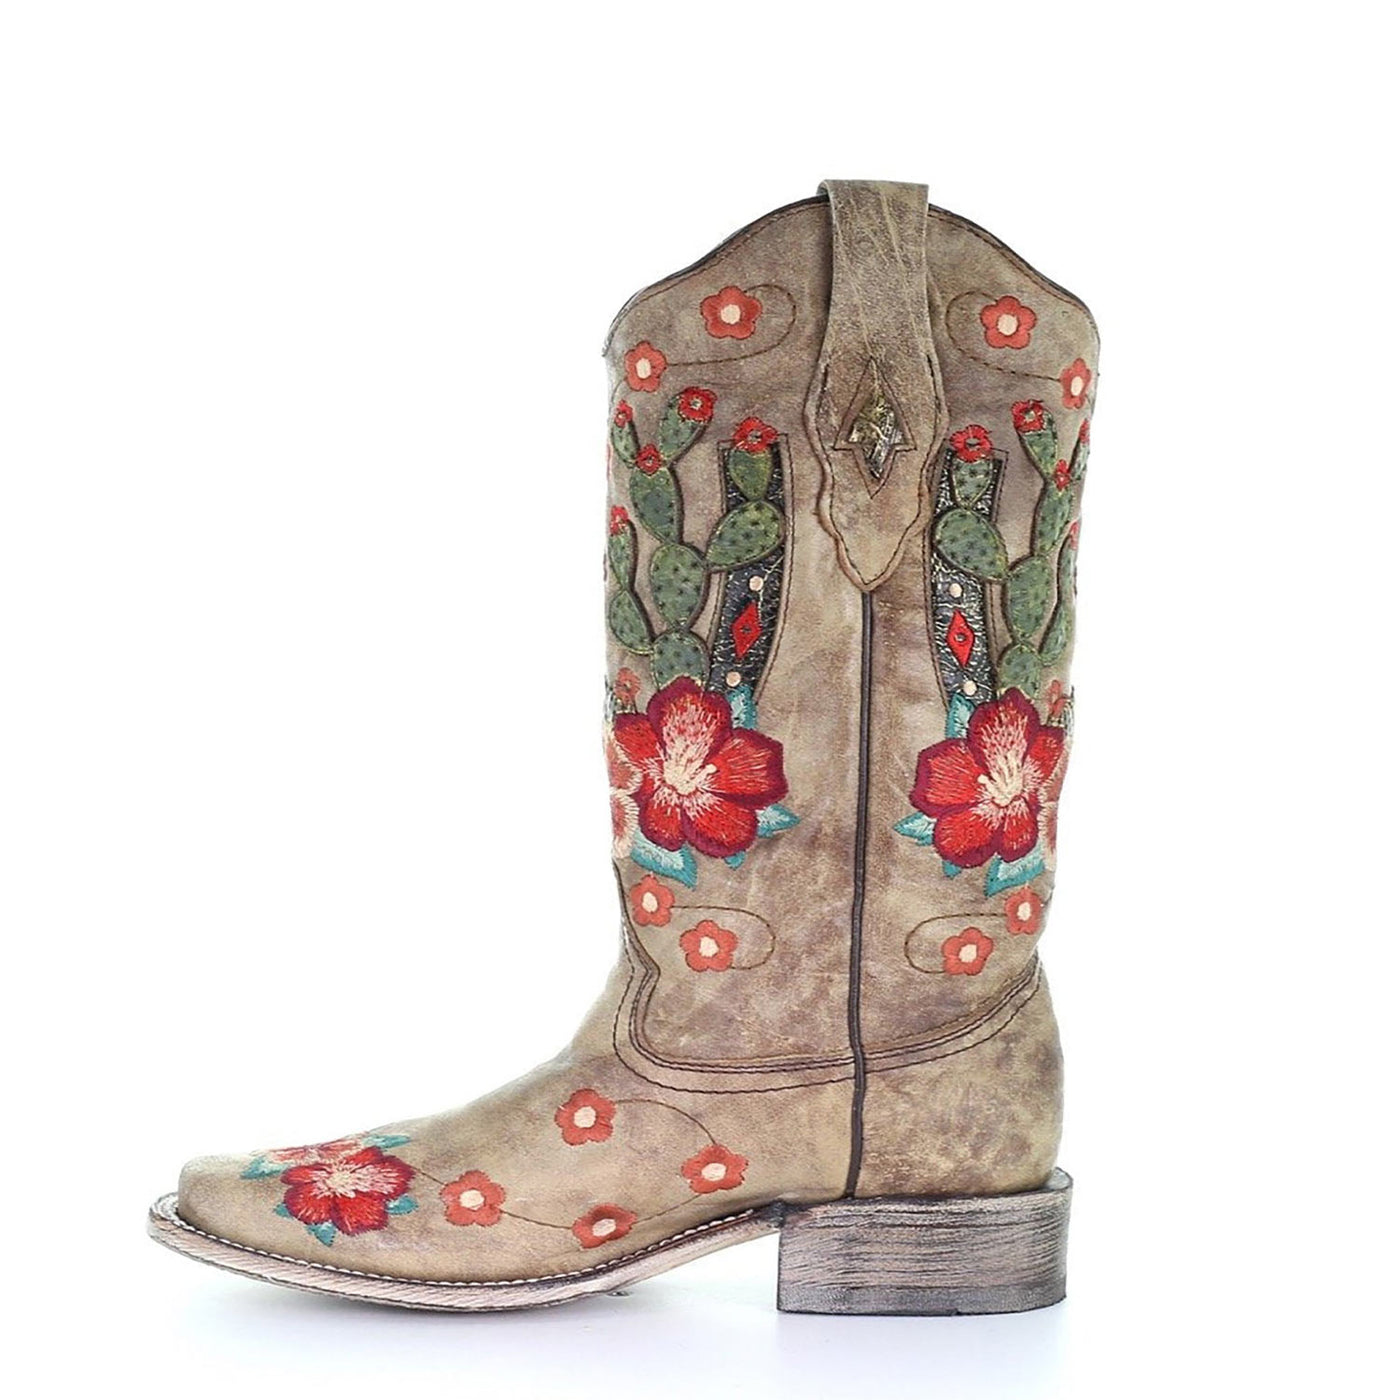 Corral | Cactus Overlay & Embroidery SQ. Toe | Taupe